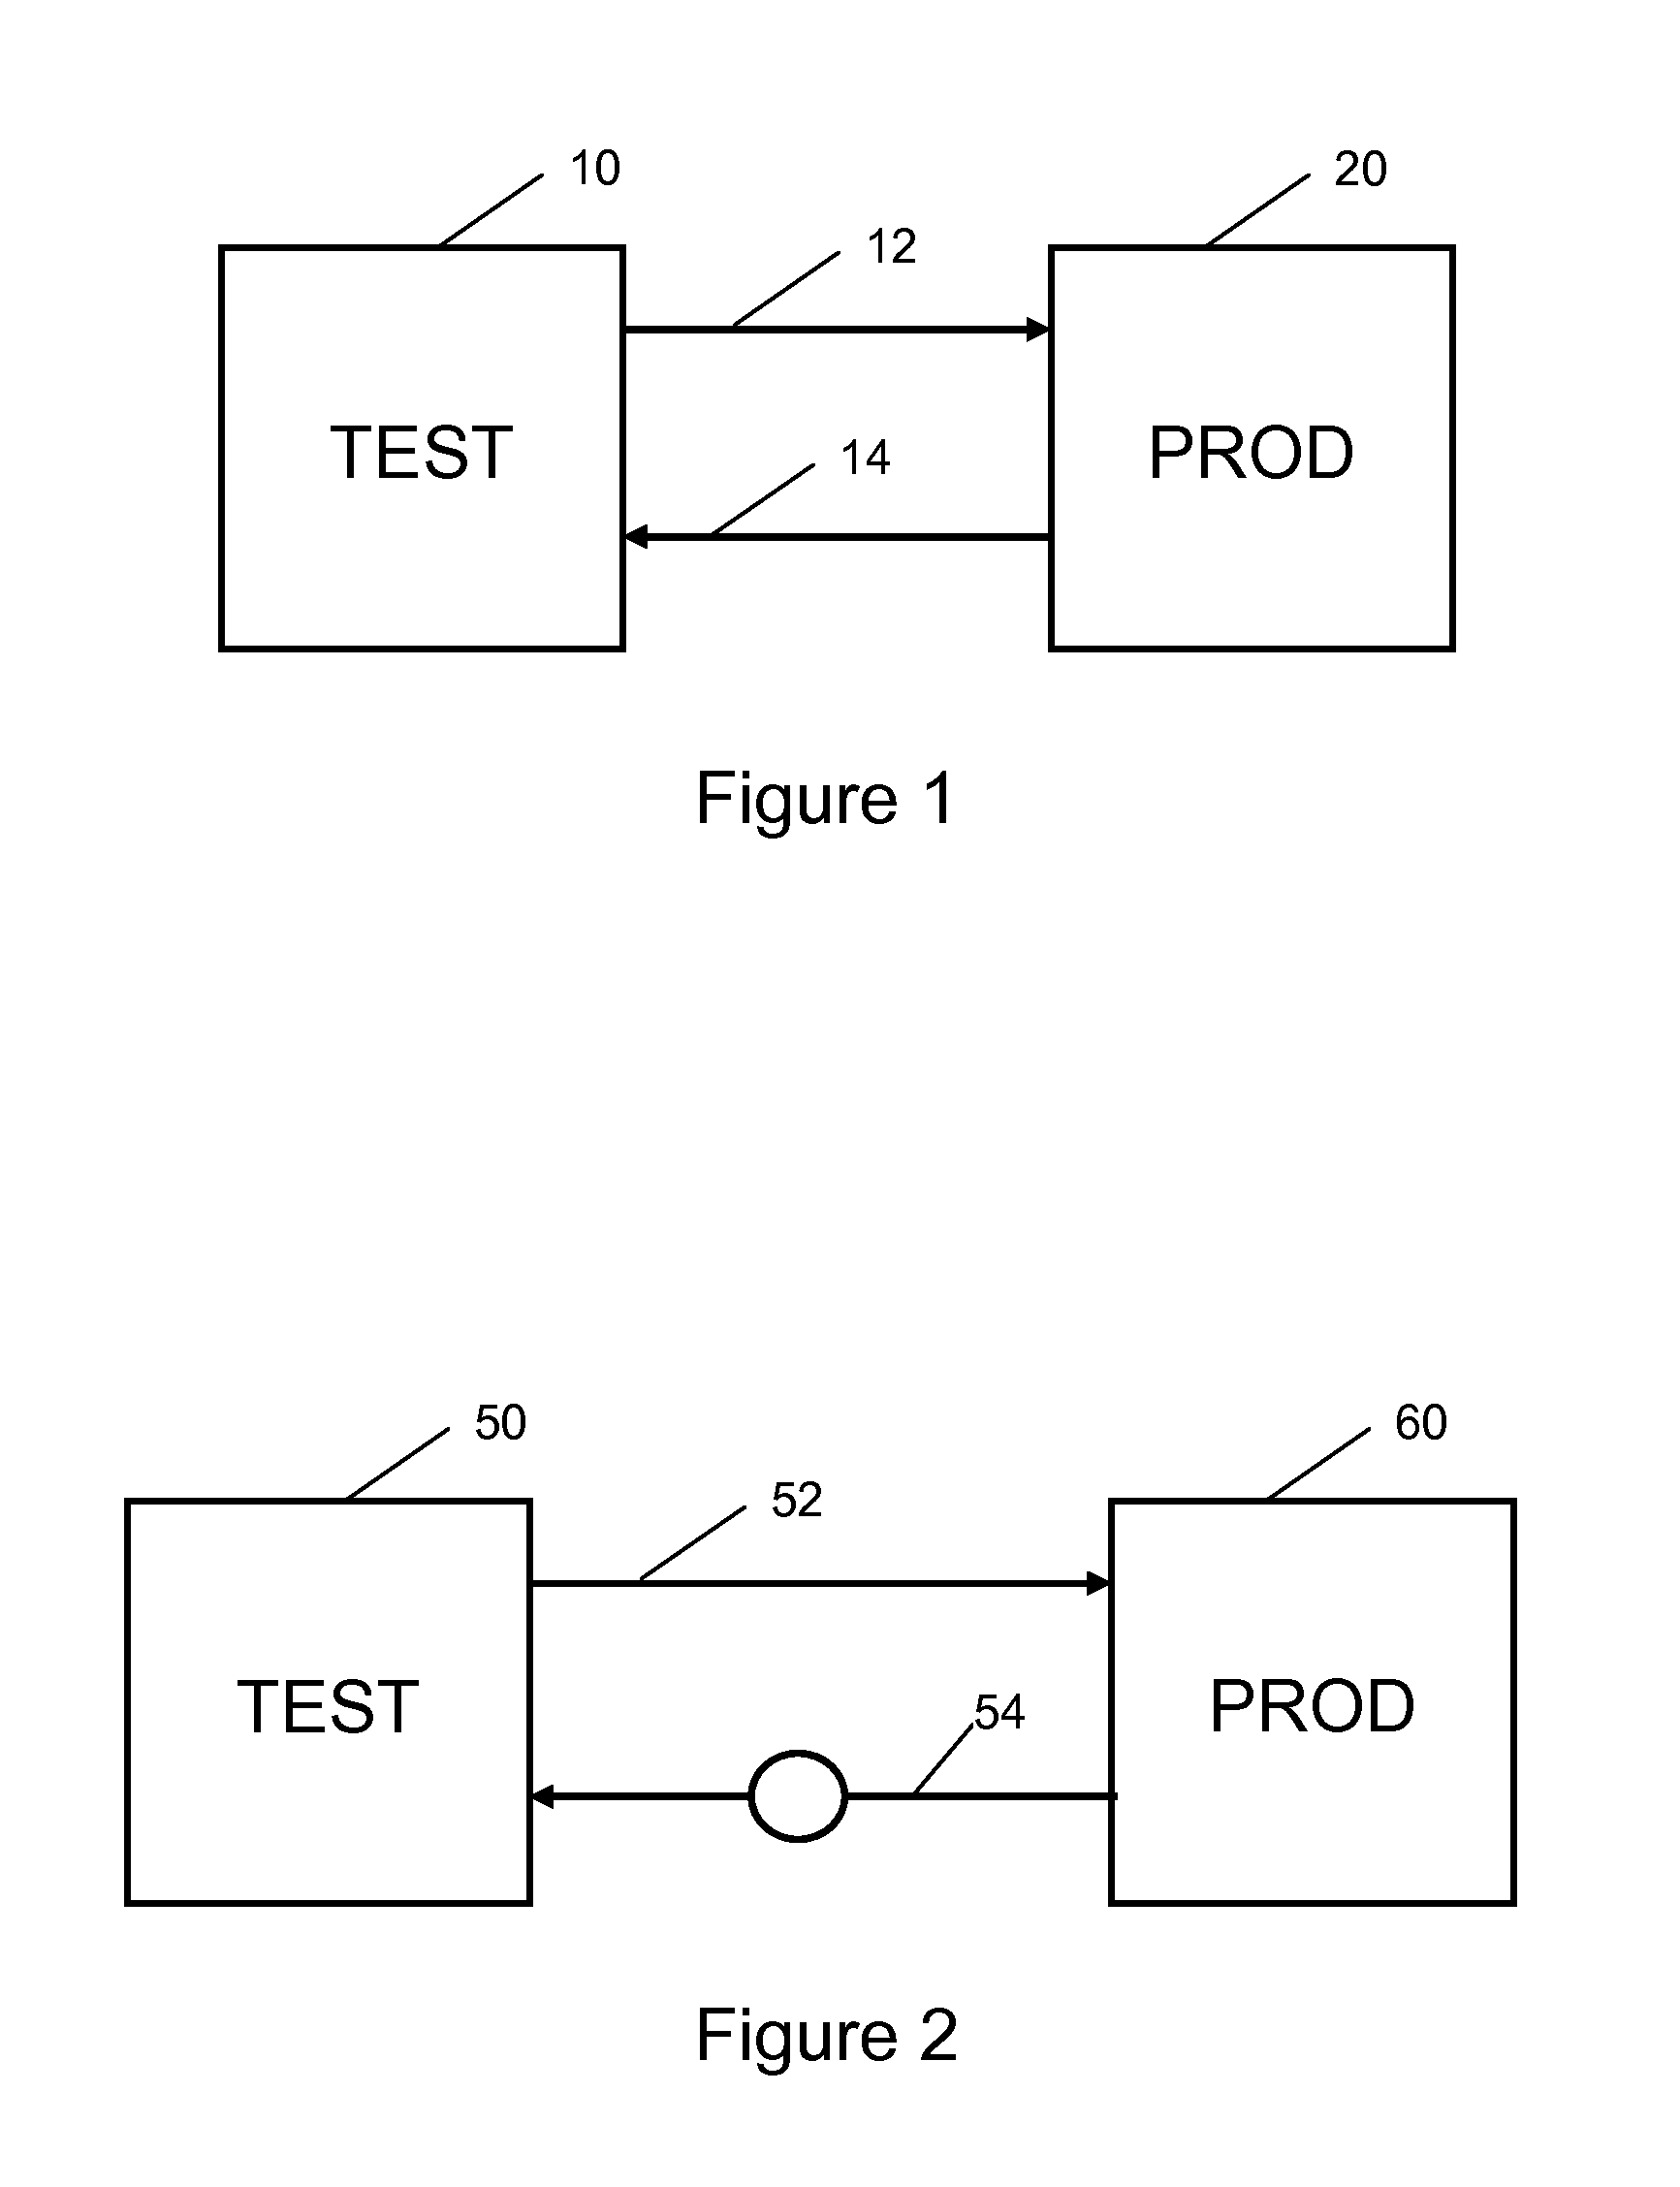 System and method for testing the development and updates in a test system using production/live data